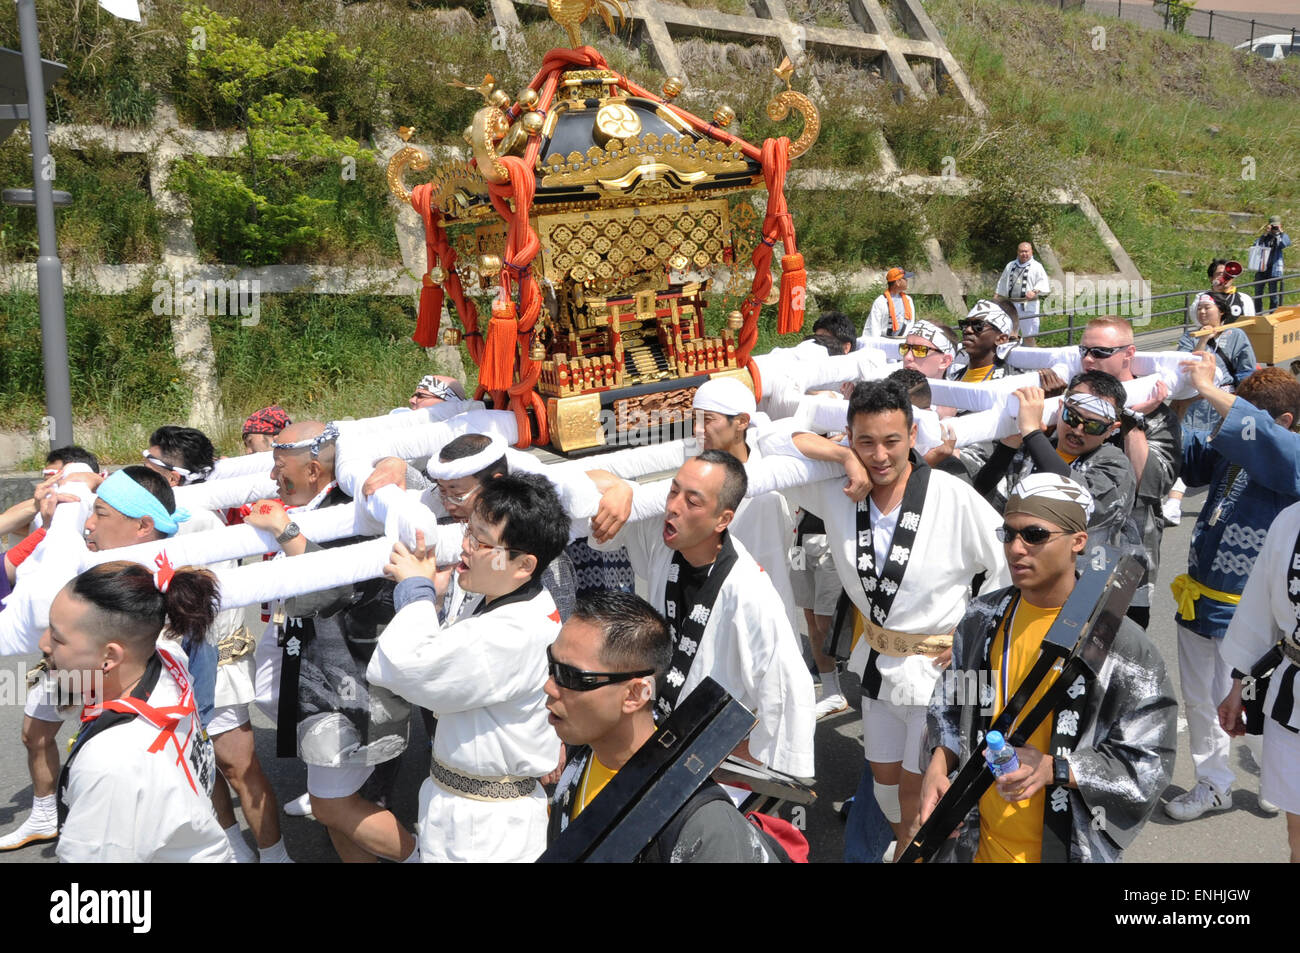 U.S. sailors join Japanese men carrying a Shinto shrine, called a mikoshi, to bring good luck to the city during the annual Mikoshi festival May 3, 2015 in Onagawa, Miyagi prefecture, Japan. The city of Onagawa was devastated by the earthquake and tsunami in 2011and began inviting the sailors to join in the festival to thank them for the assistance they provided following the disaster. Stock Photo